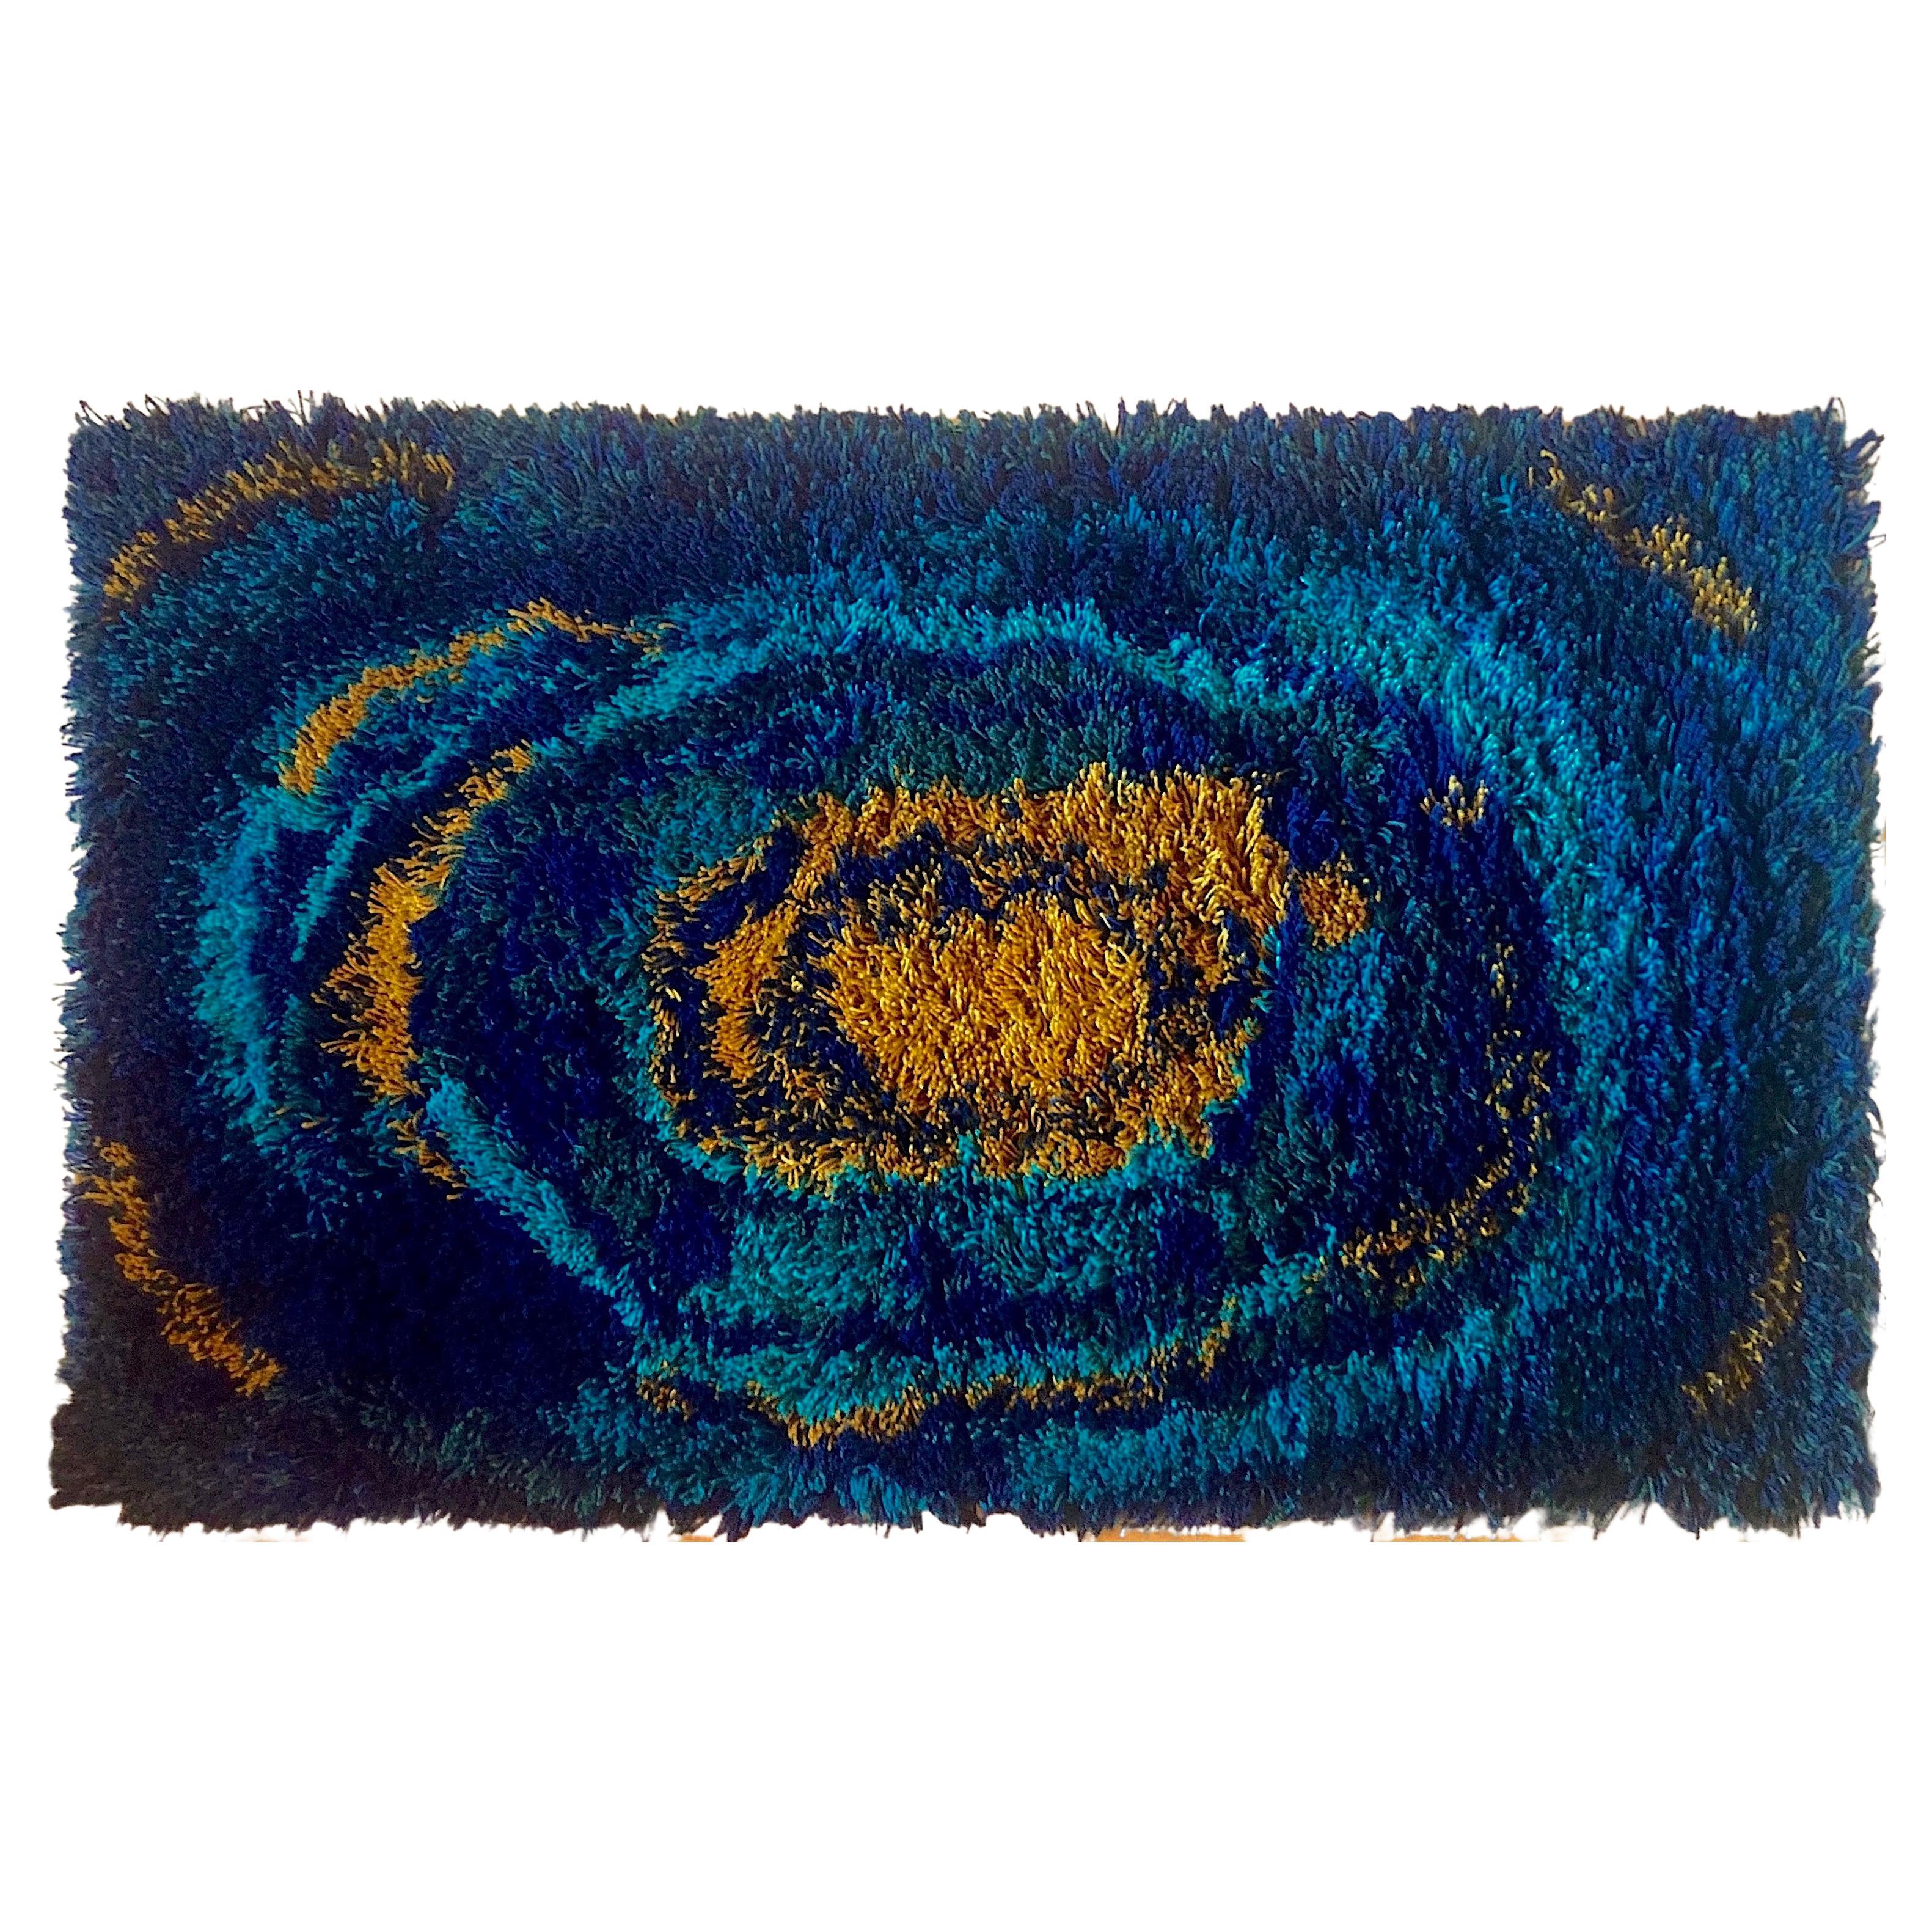 A vintage Scandinavian rya rug designed in the 1960s for EGE Rya De Luxe, a subsidiary of Denmark's most prestigious carpet manufacturer, EGE Taepper. This deep and dense midcentury design is 100% thick wool shag in a swirling abstract pattern,